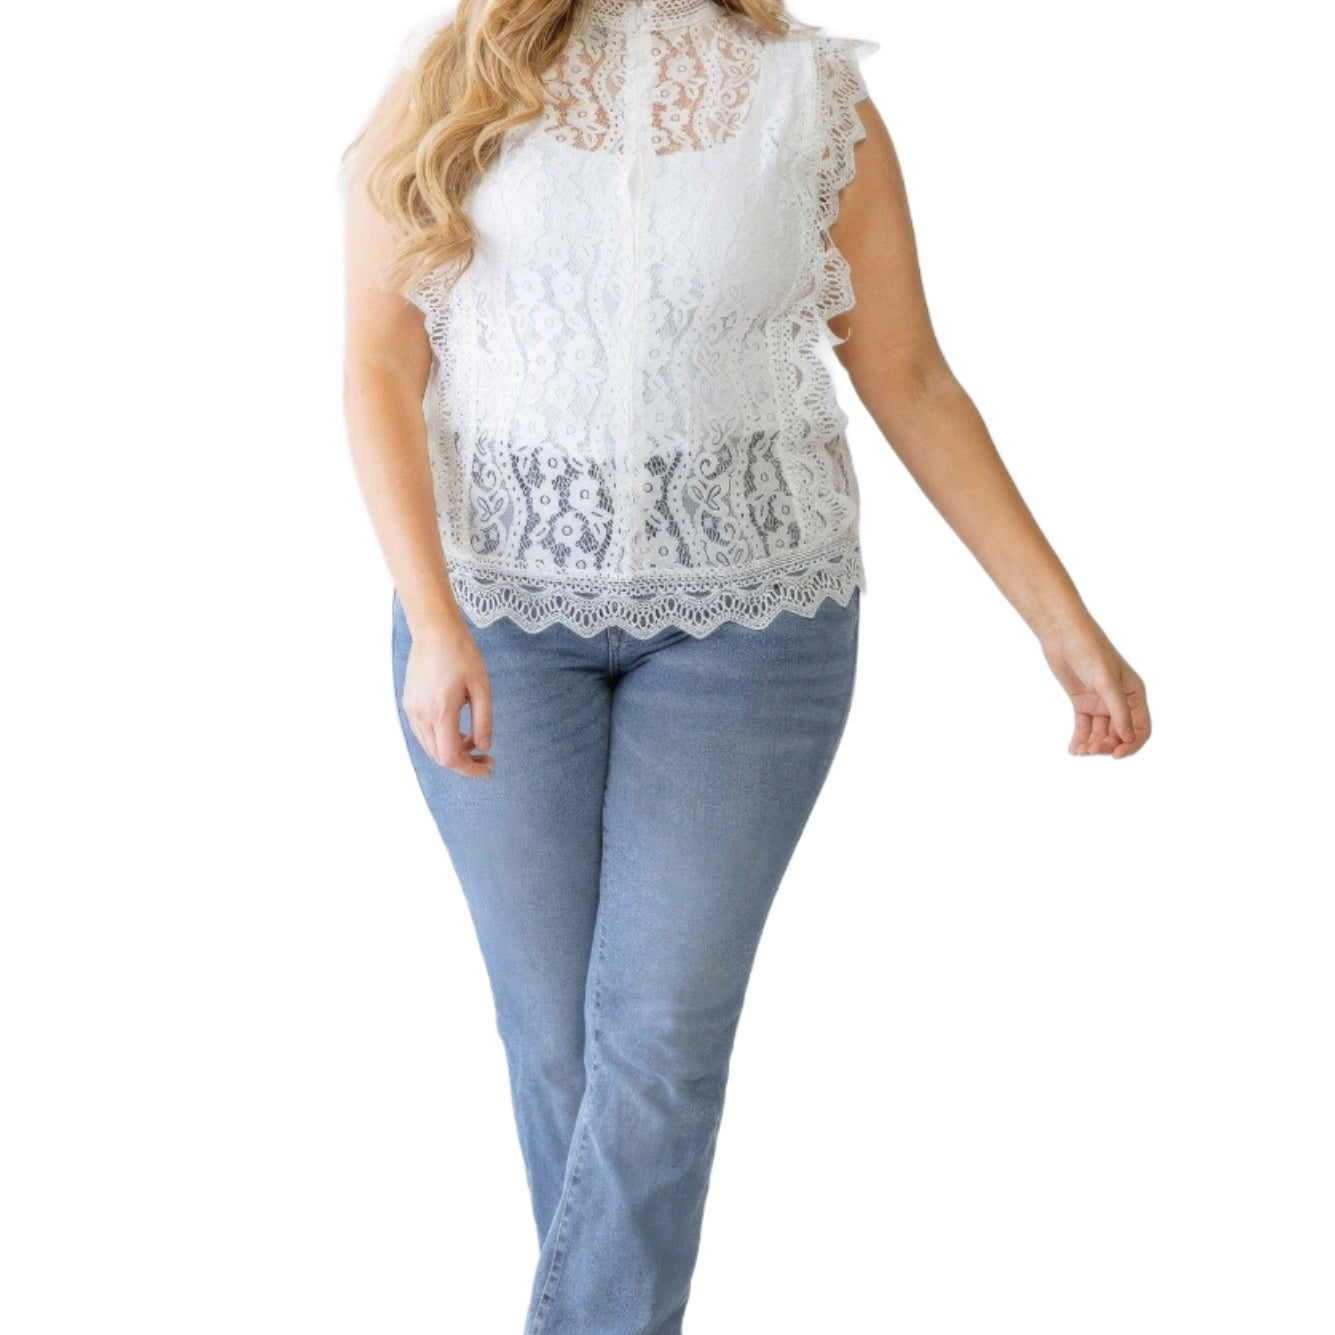 Women's Shirts Plus Floral Lace Embroidery Top